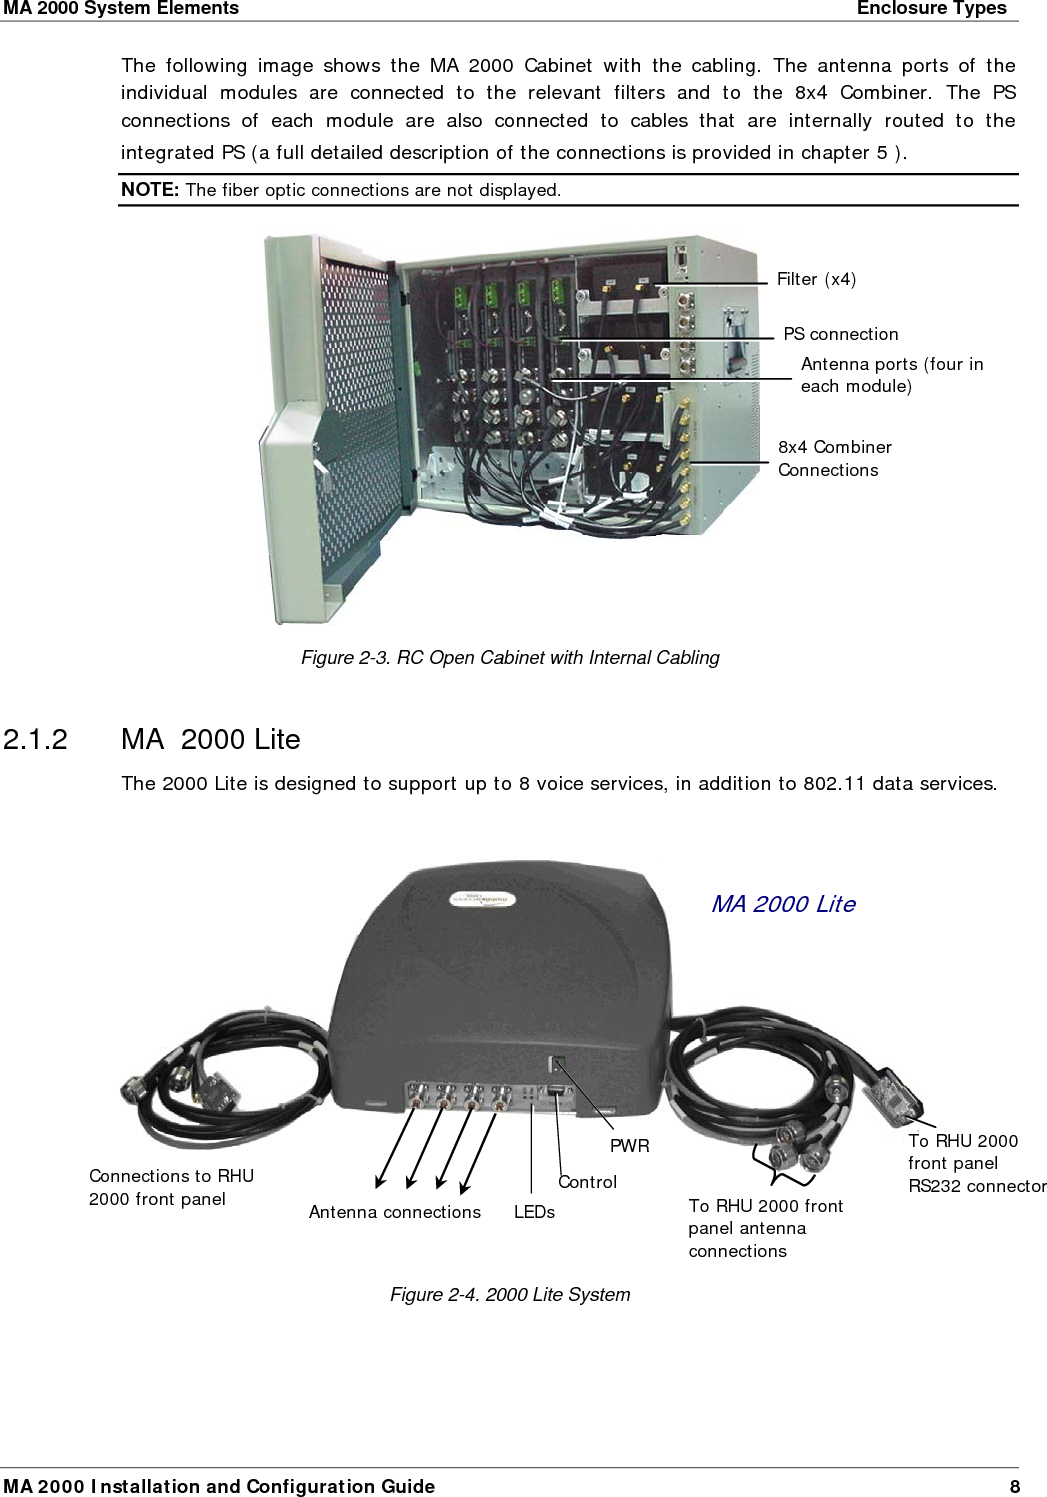 MA 2000 System Elements    Enclosure Types  MA 2000 Installation and Configuration Guide  9 MA 2000 Lite capabilities: • External connections to two MA 2000 RHUs (to which Add-on units can be added) • Internal filters and combiner (converges all services)  • Connection to 860 WLAN for support of 802.11a/b/g data services  • External power supplies  The MA 2000 enclosure contains two sets of cables, each providing connections to two MA 2000 RHUs.   Cable Connector   Description Four N-type connectors  Coax connections to corresponding antennas 1x DB-9 connector  Connection to RHU front panel RS232 connector The following table describes the MA 2000 Lite front panel connectors. Connector   Description Ant-1 to Ant-4 (N-type)  Coax connections to corresponding antennas Control  Control connector for MA service personnel. Power  20 to 48V DC power input The following table describes the front panel LEDs. LEDs   Description Run  Module is operating properly. Power  Green – required power is supplied.  